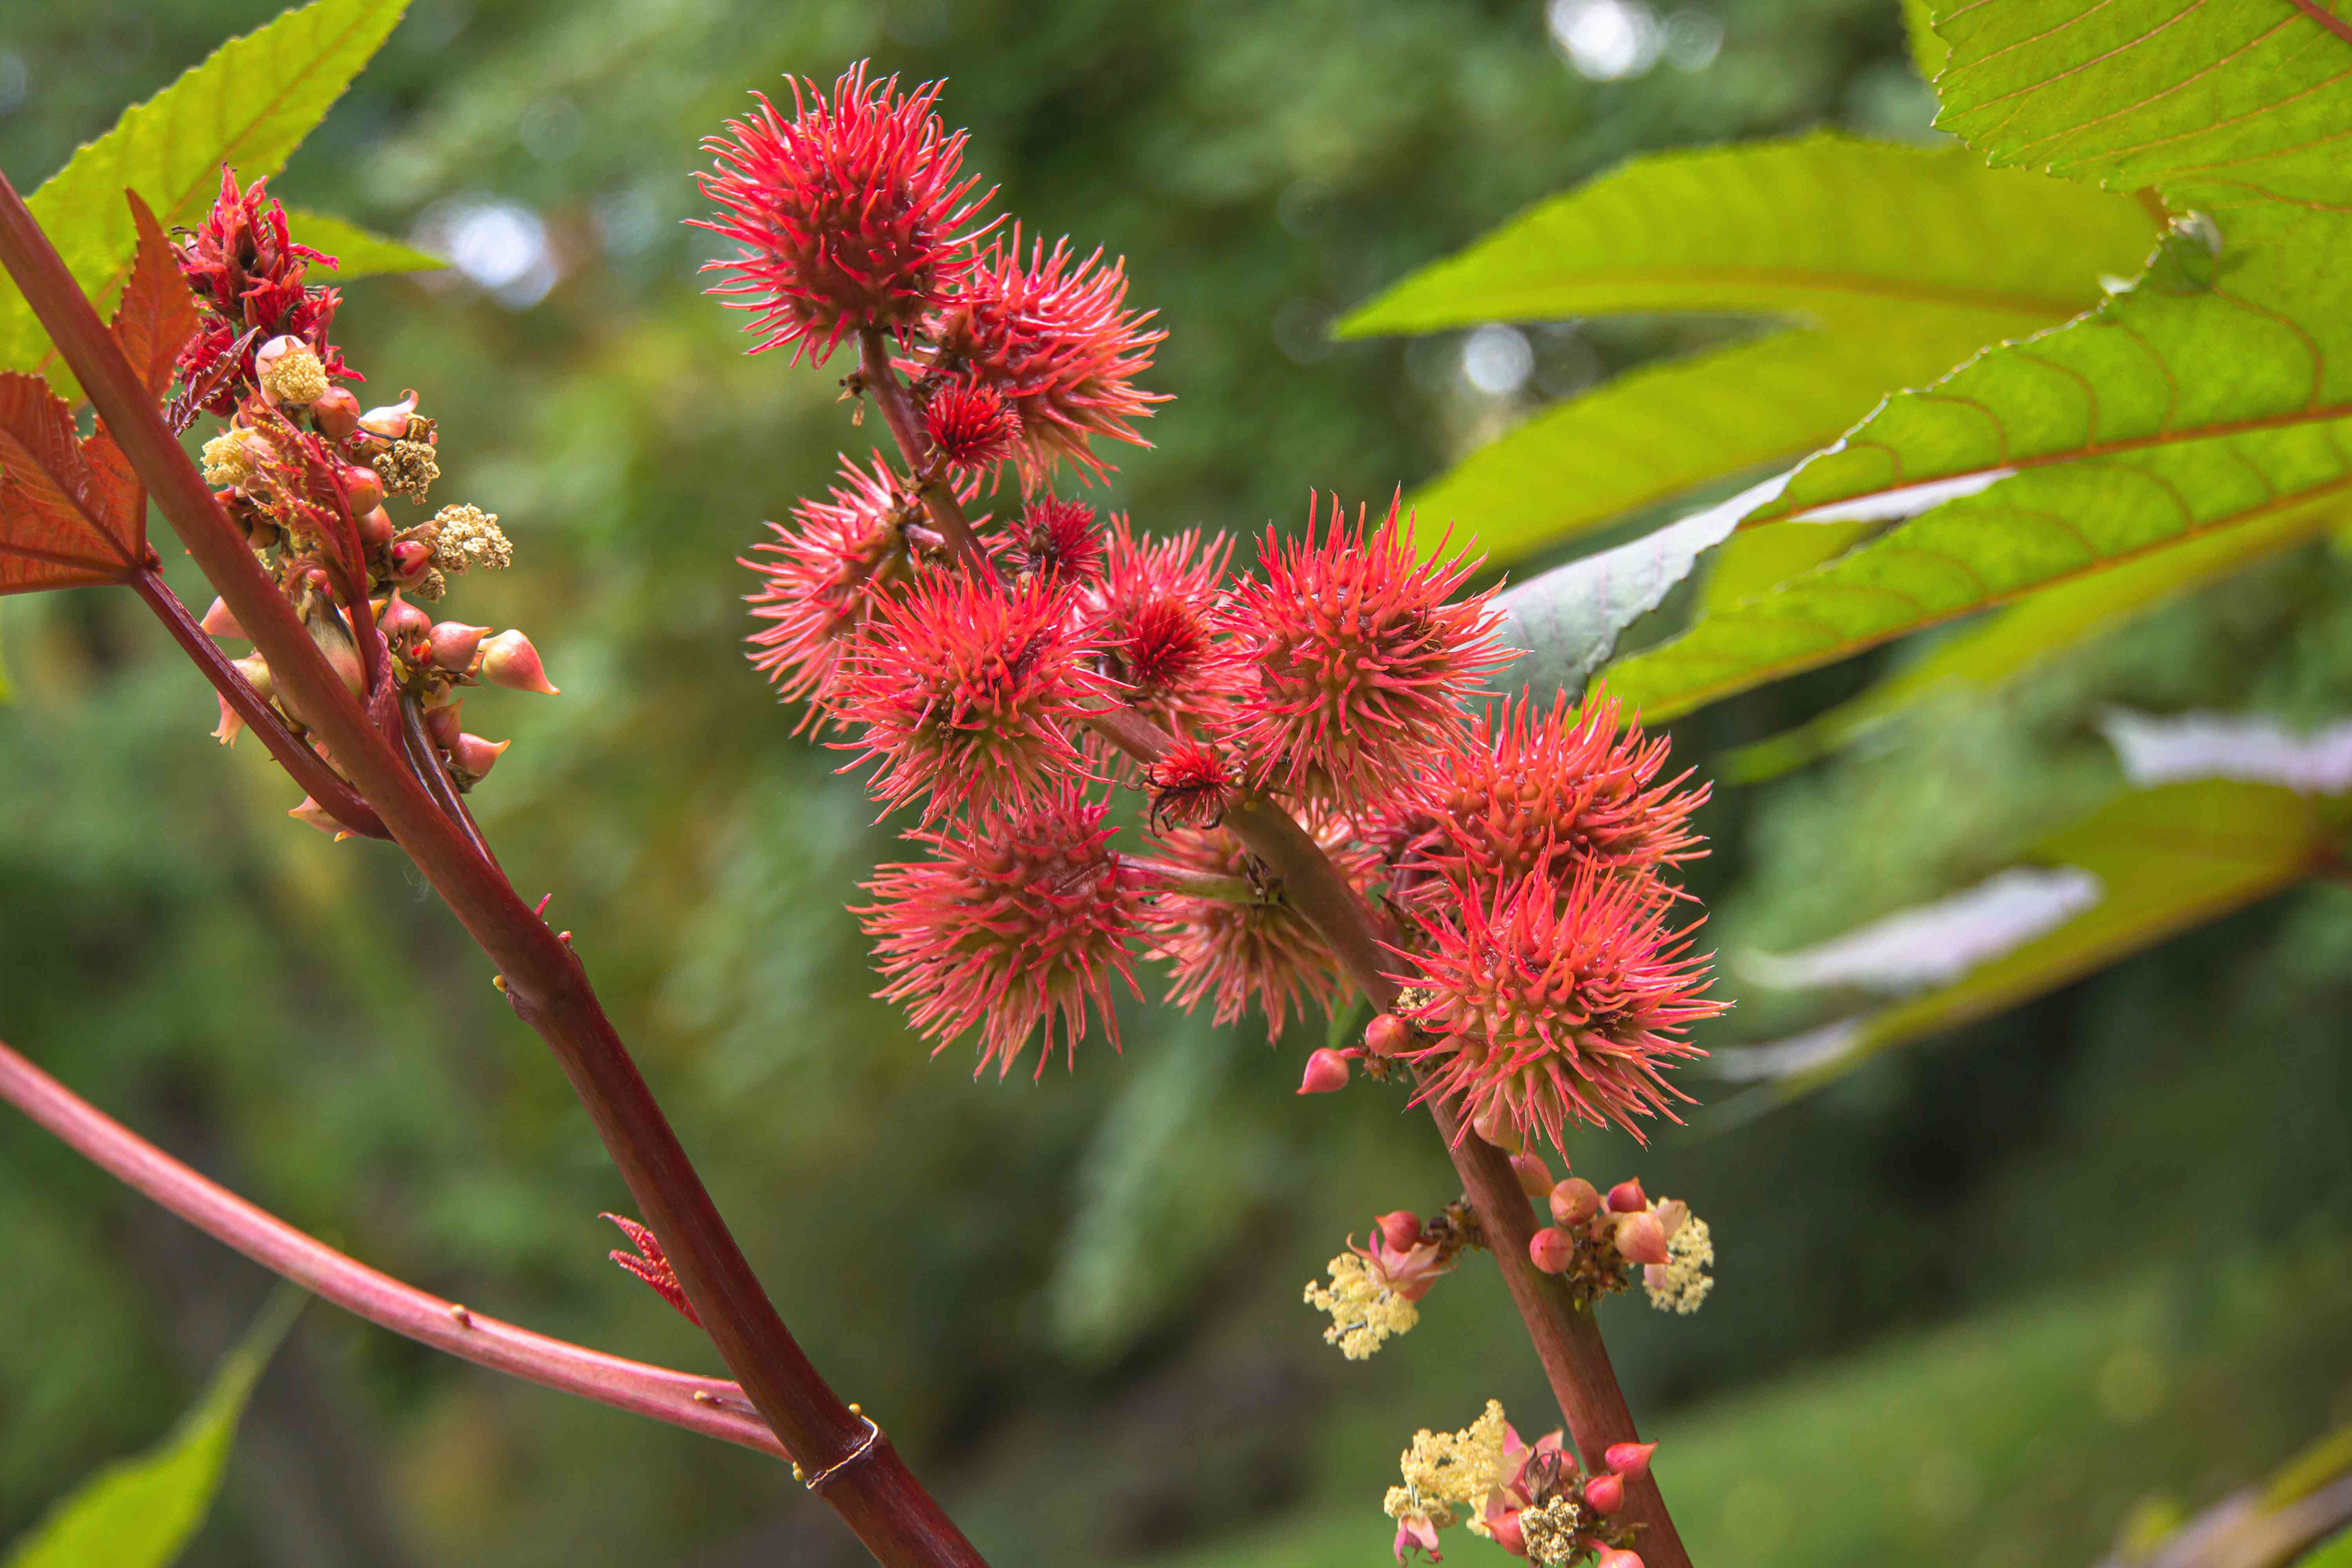 Close-up of vibrant red spiky flowers on a castor oil plant set against a backdrop of green leaves and a blurred natural background. The stems and flowers are prominently in focus, showcasing the unique texture and color of the plant.